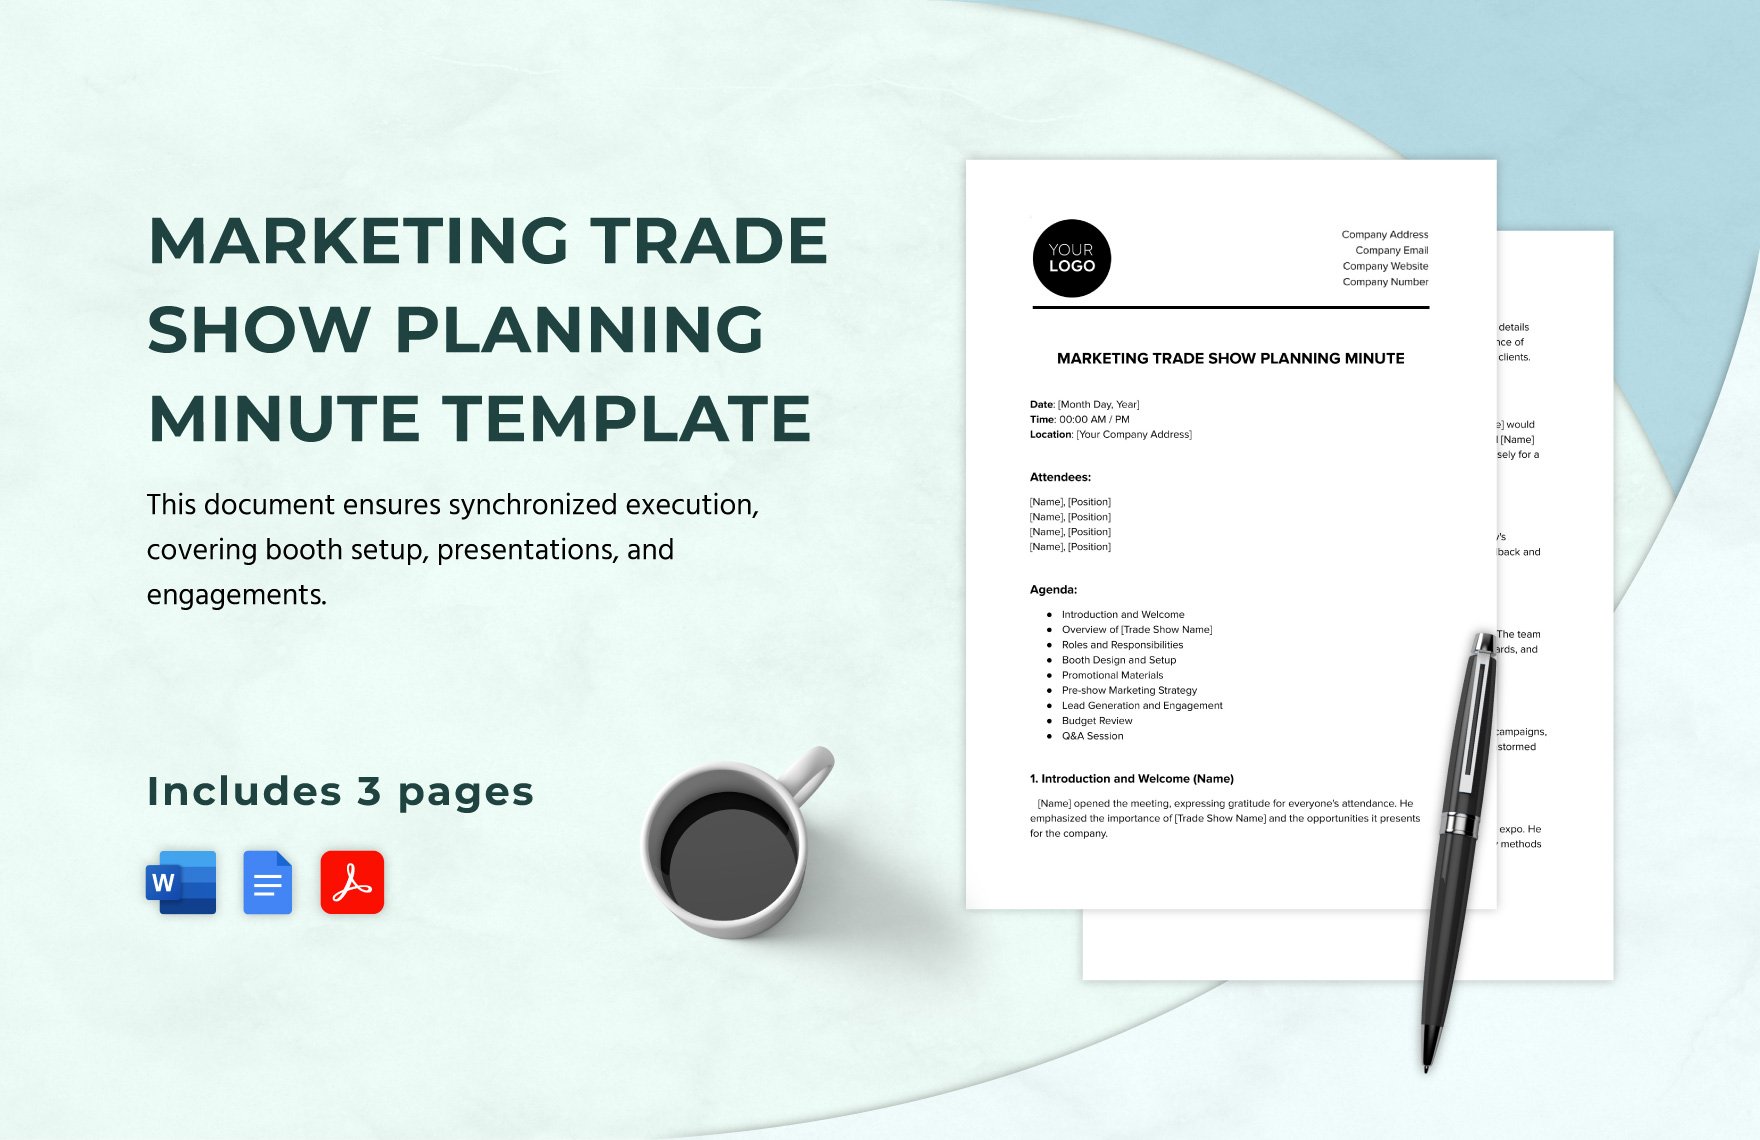 Marketing Trade Show Planning Minute Template in Word, Google Docs, PDF